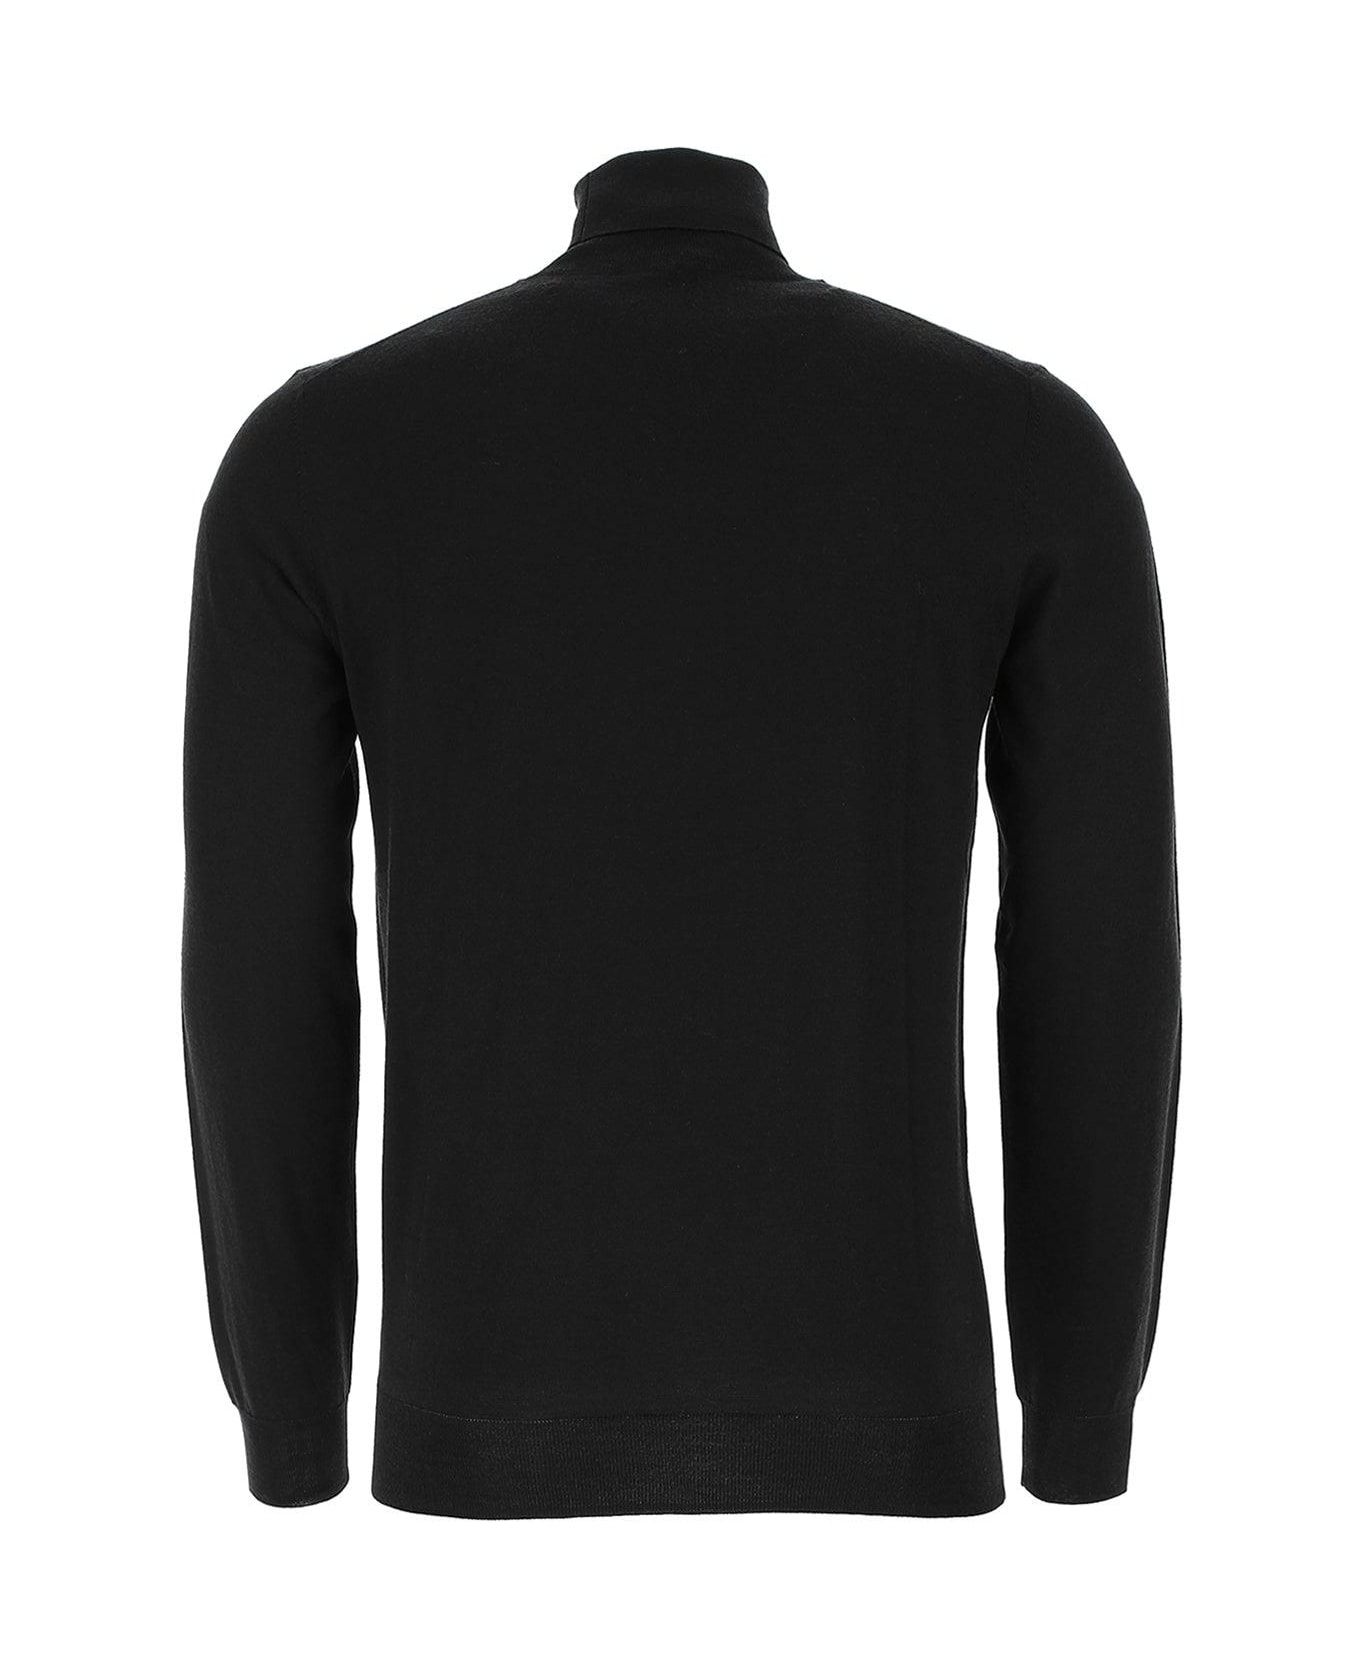 Paolo Pecora Roll Neck Knitted Jumper Paolo Pecora - BLACK ニットウェア